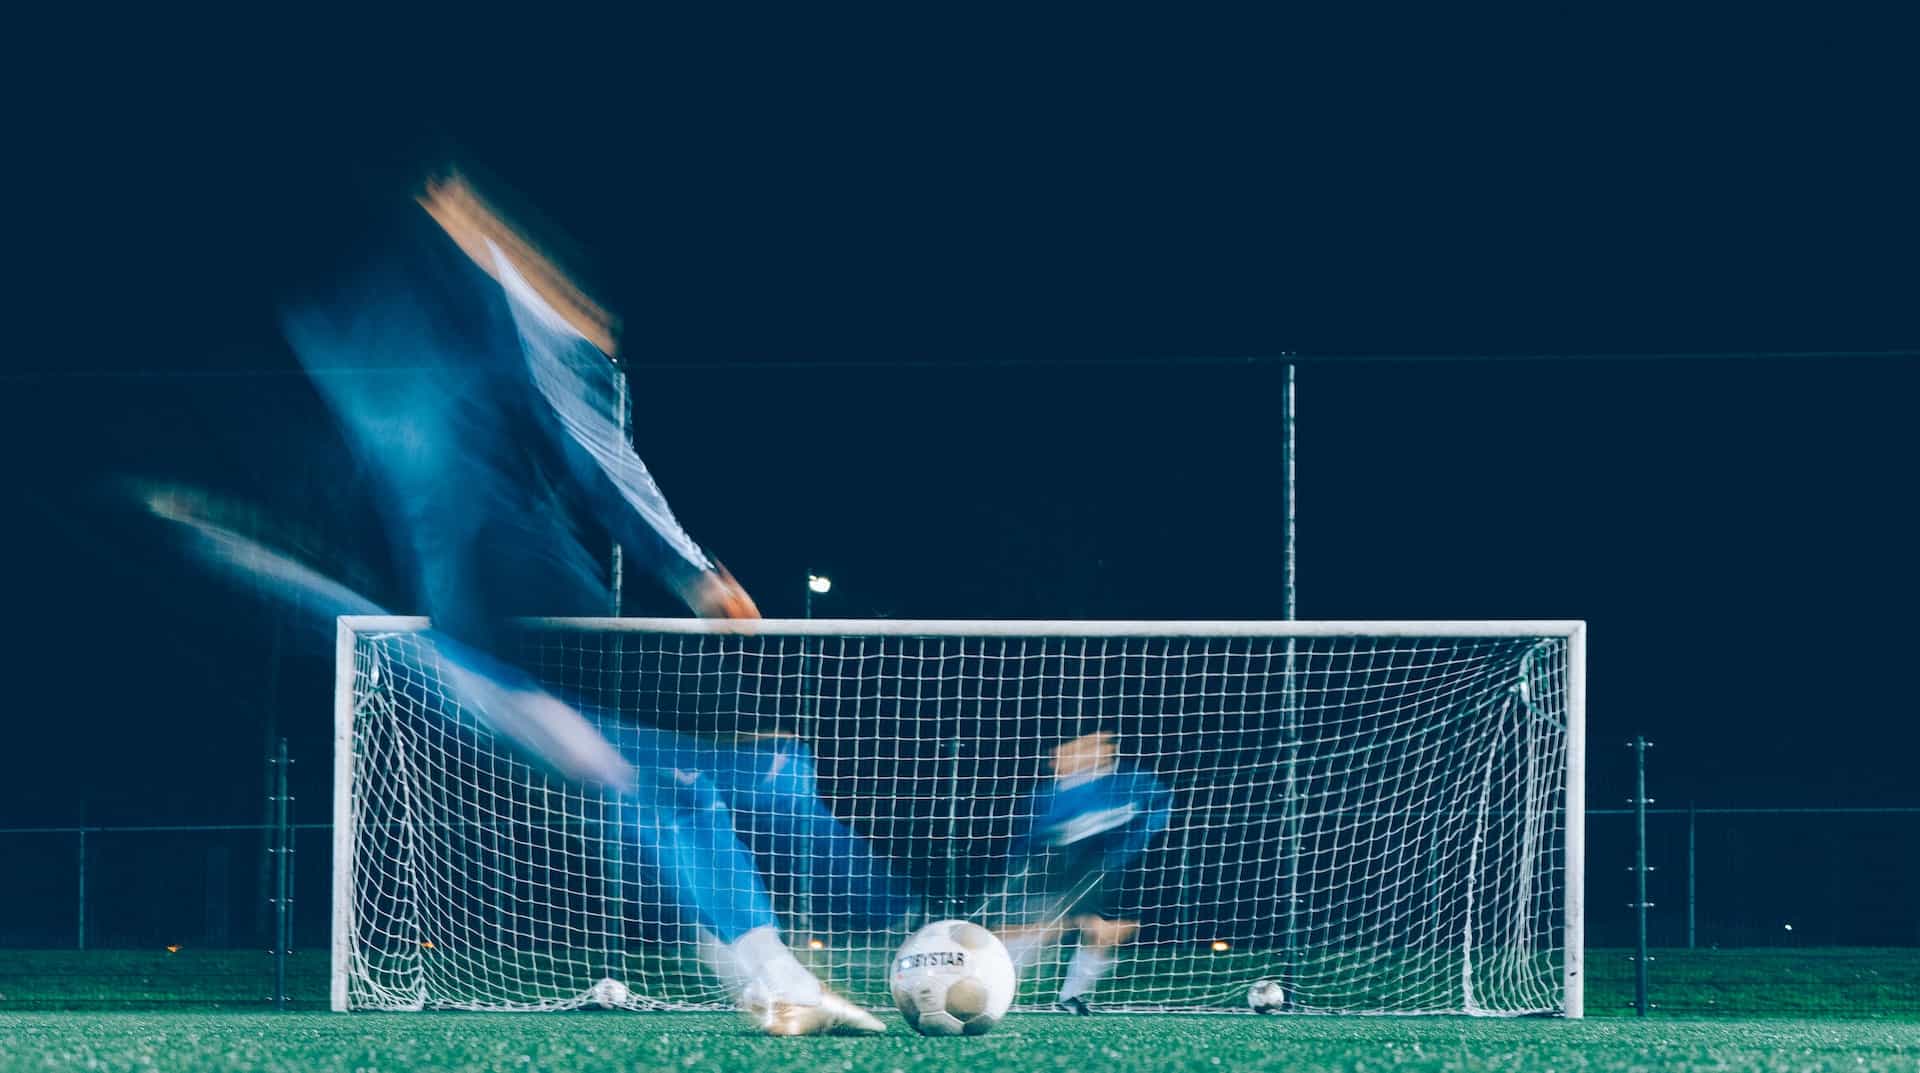 Blurred image of soccer players kicking a ball into a net.